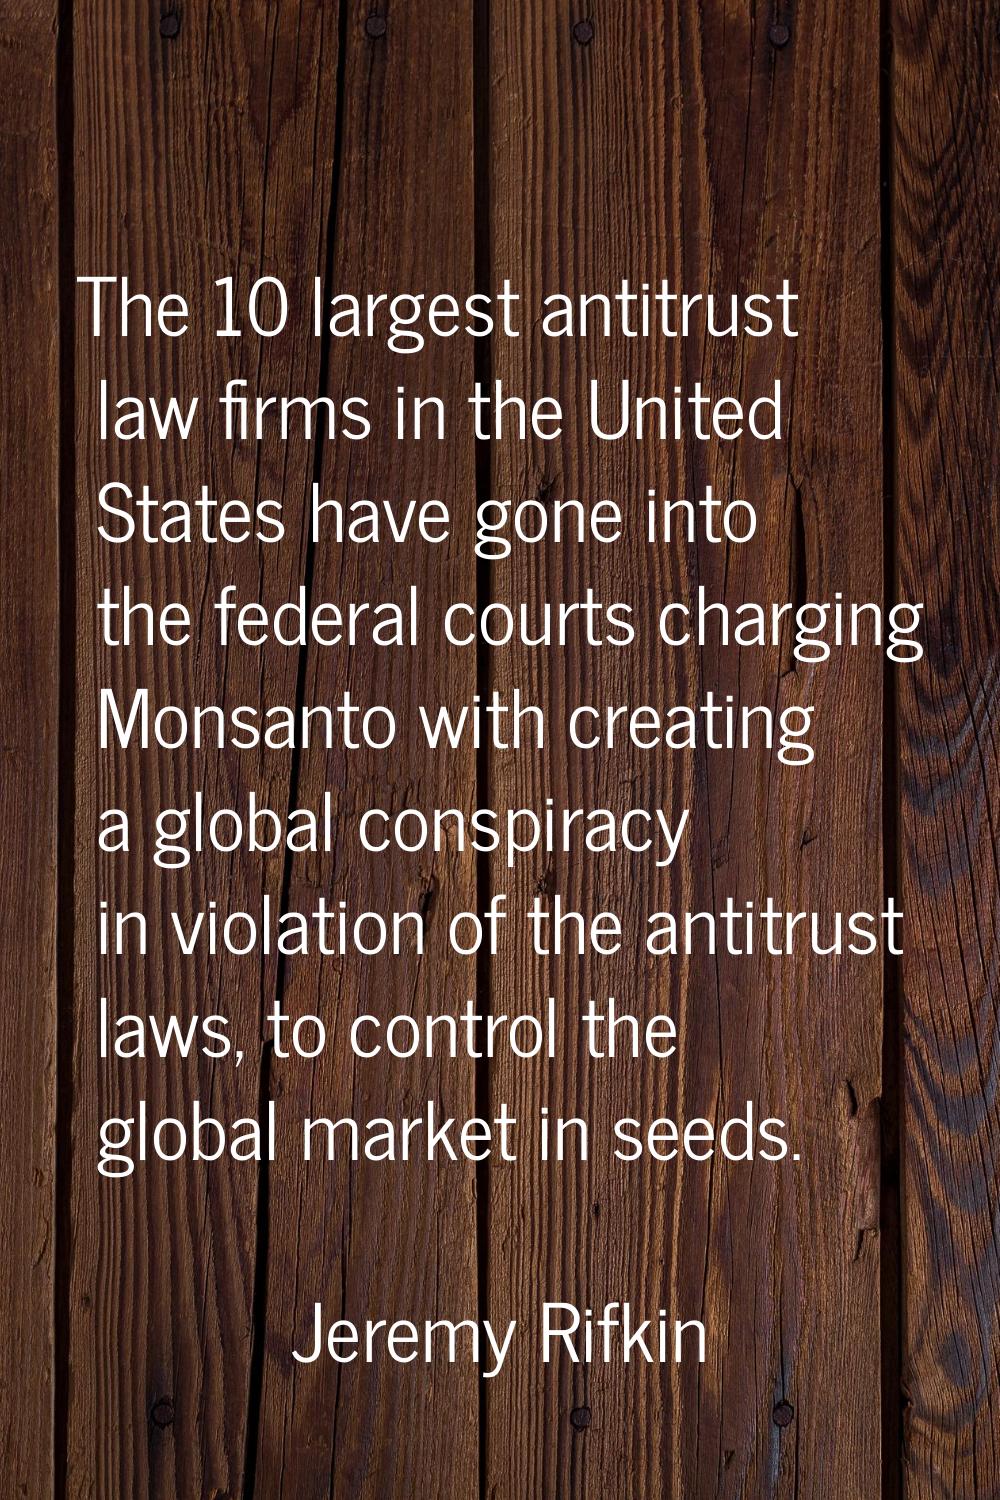 The 10 largest antitrust law firms in the United States have gone into the federal courts charging 